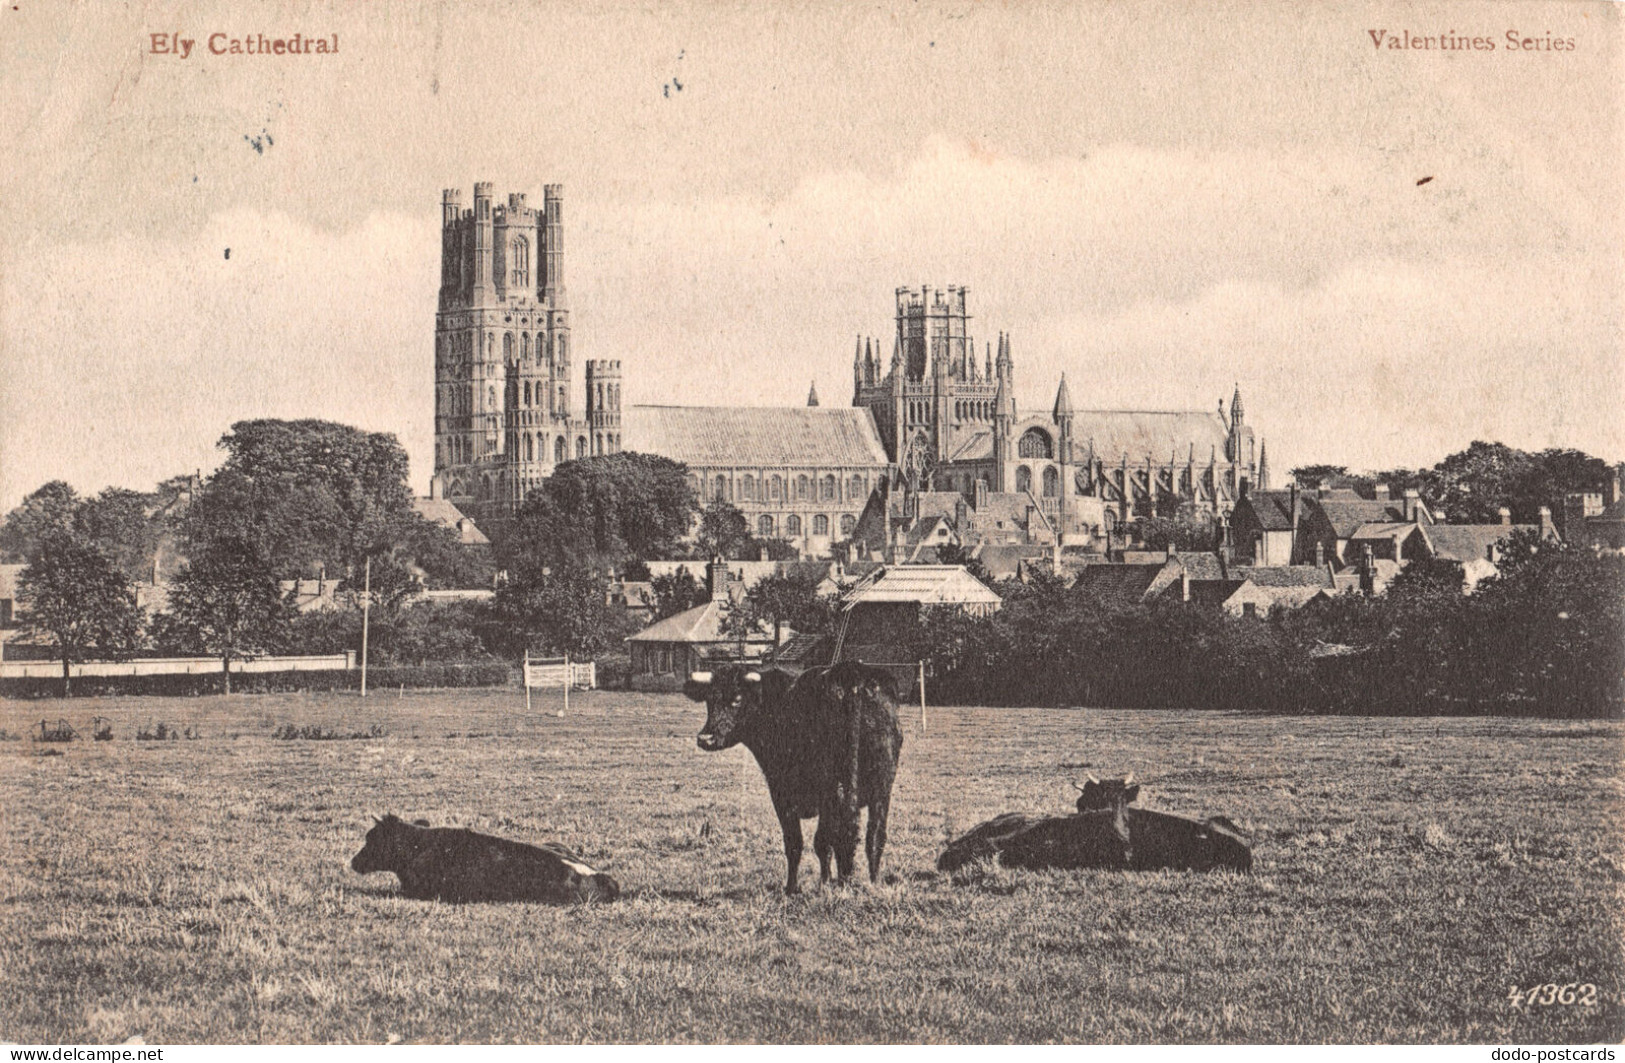 R333732 Ely Cathedral. Valentines Series. 1904 - World